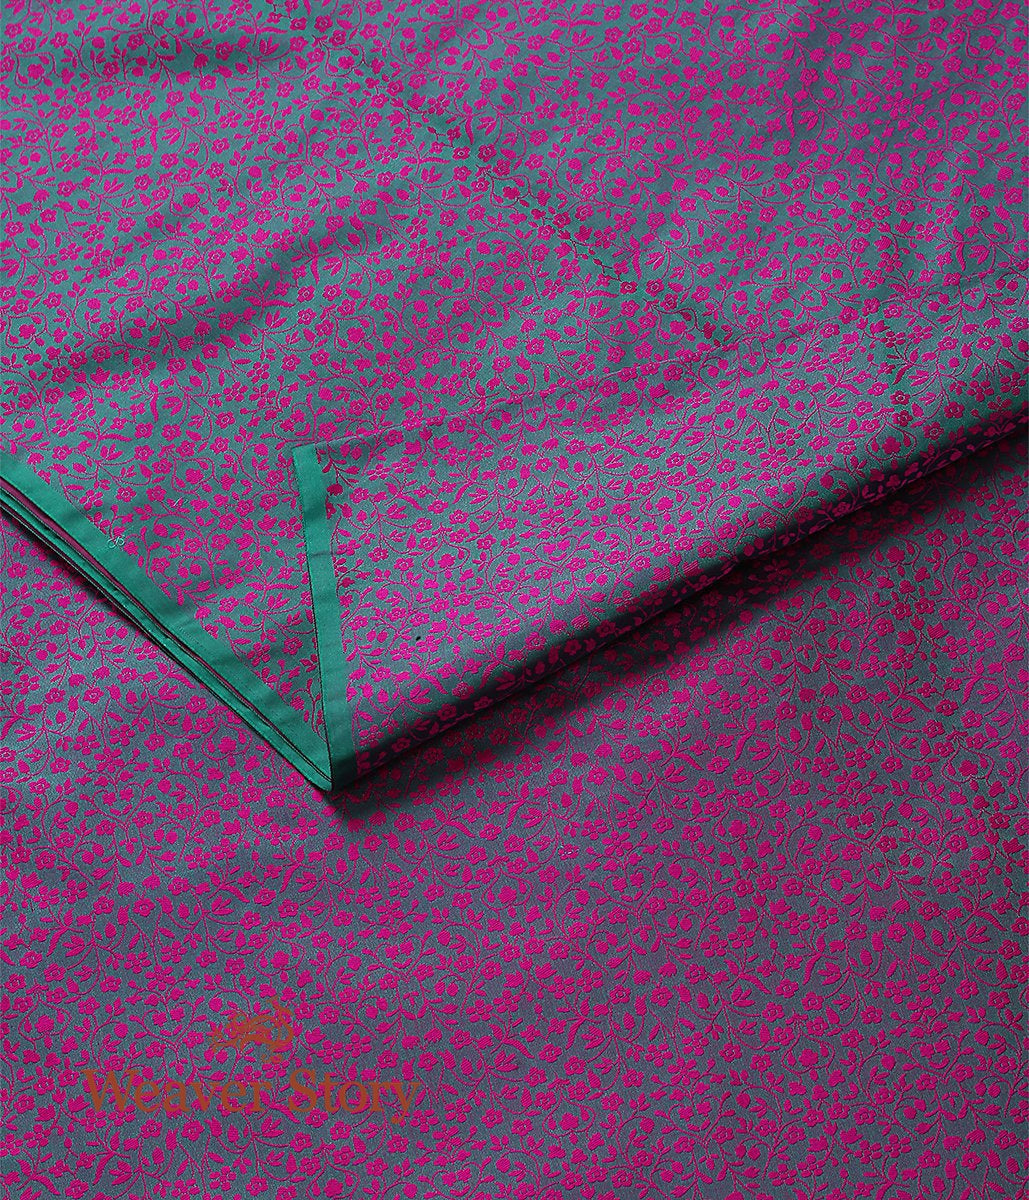 Handloom_Green_and_Pink_Self_Tanchoi_Fabric_WeaverStory_02